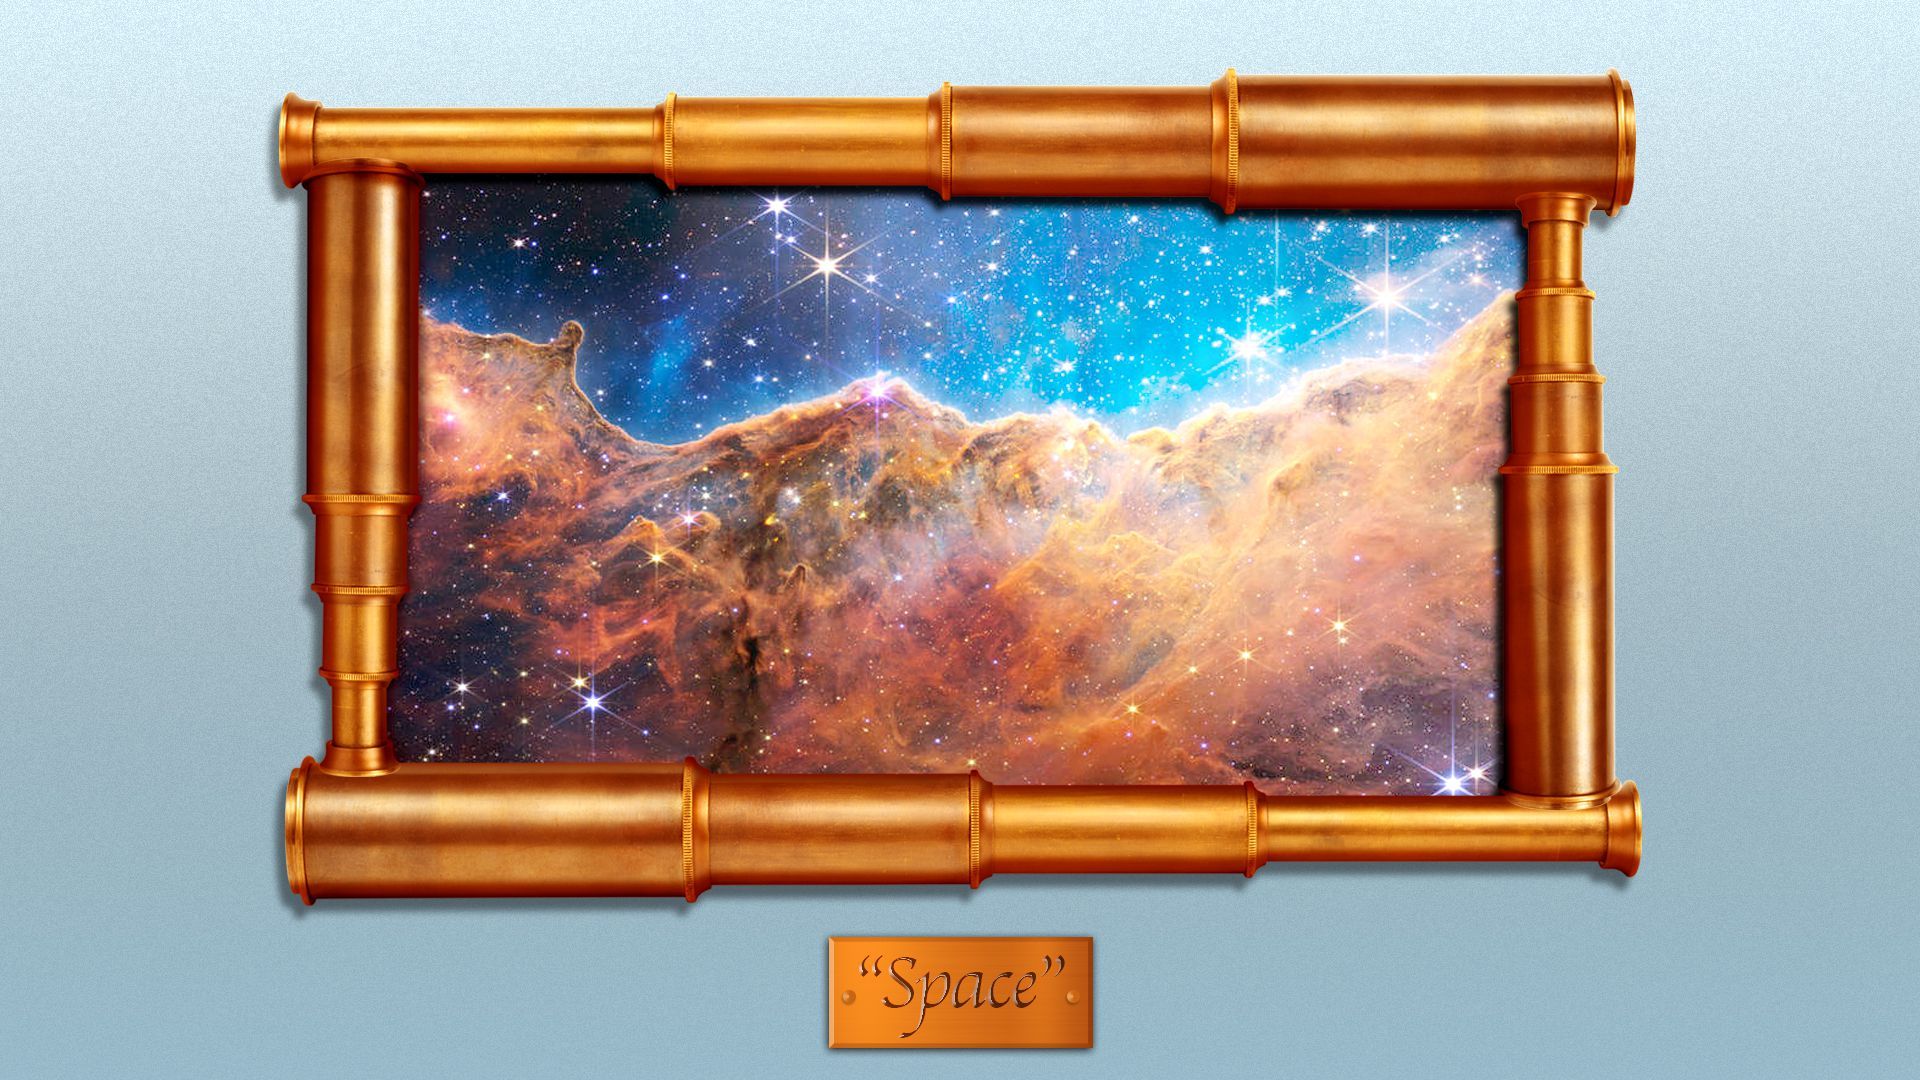 Illustration of a gallery picture of the Carina Nebula with a frame made out of telescopes